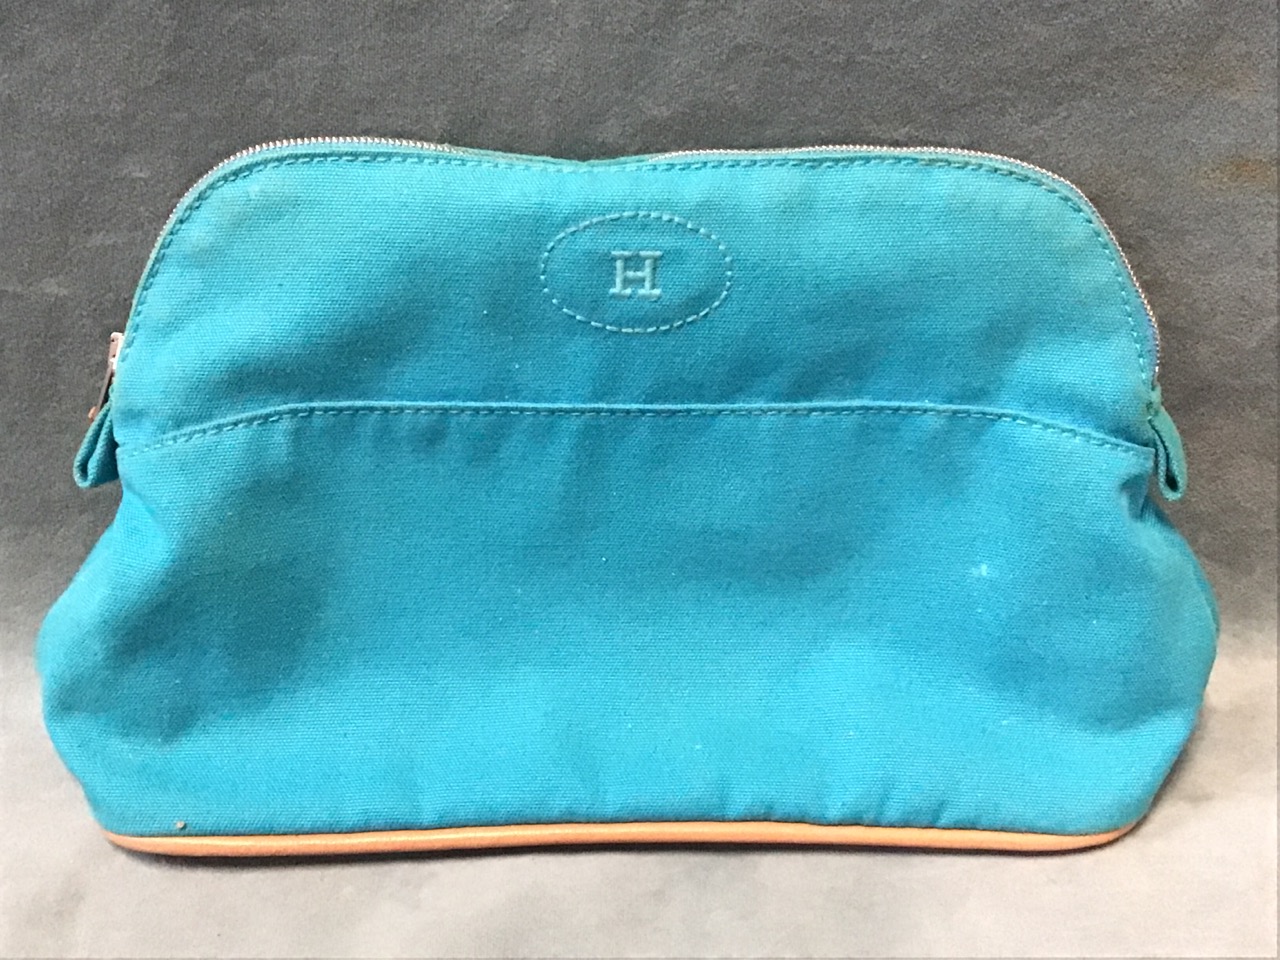 A lined Hermès blue cotton Bolide case with embroidered logo and leather piping.